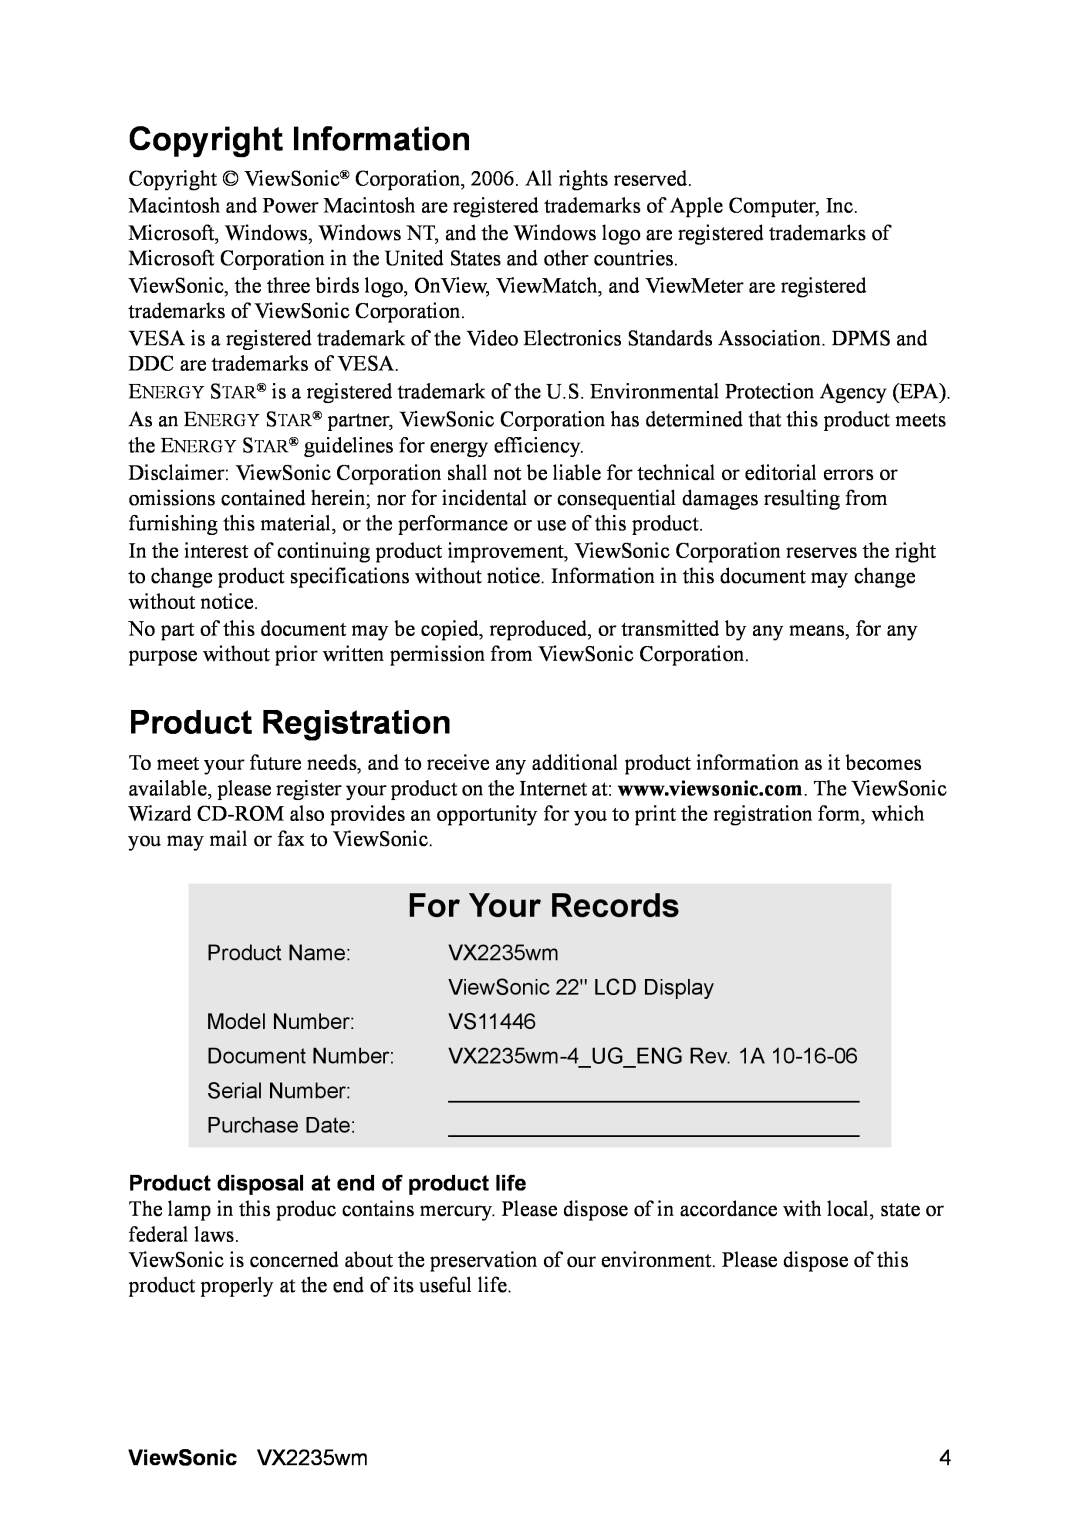 ViewSonic VX2235WM Copyright Information, Product Registration, For Your Records, Product disposal at end of product life 